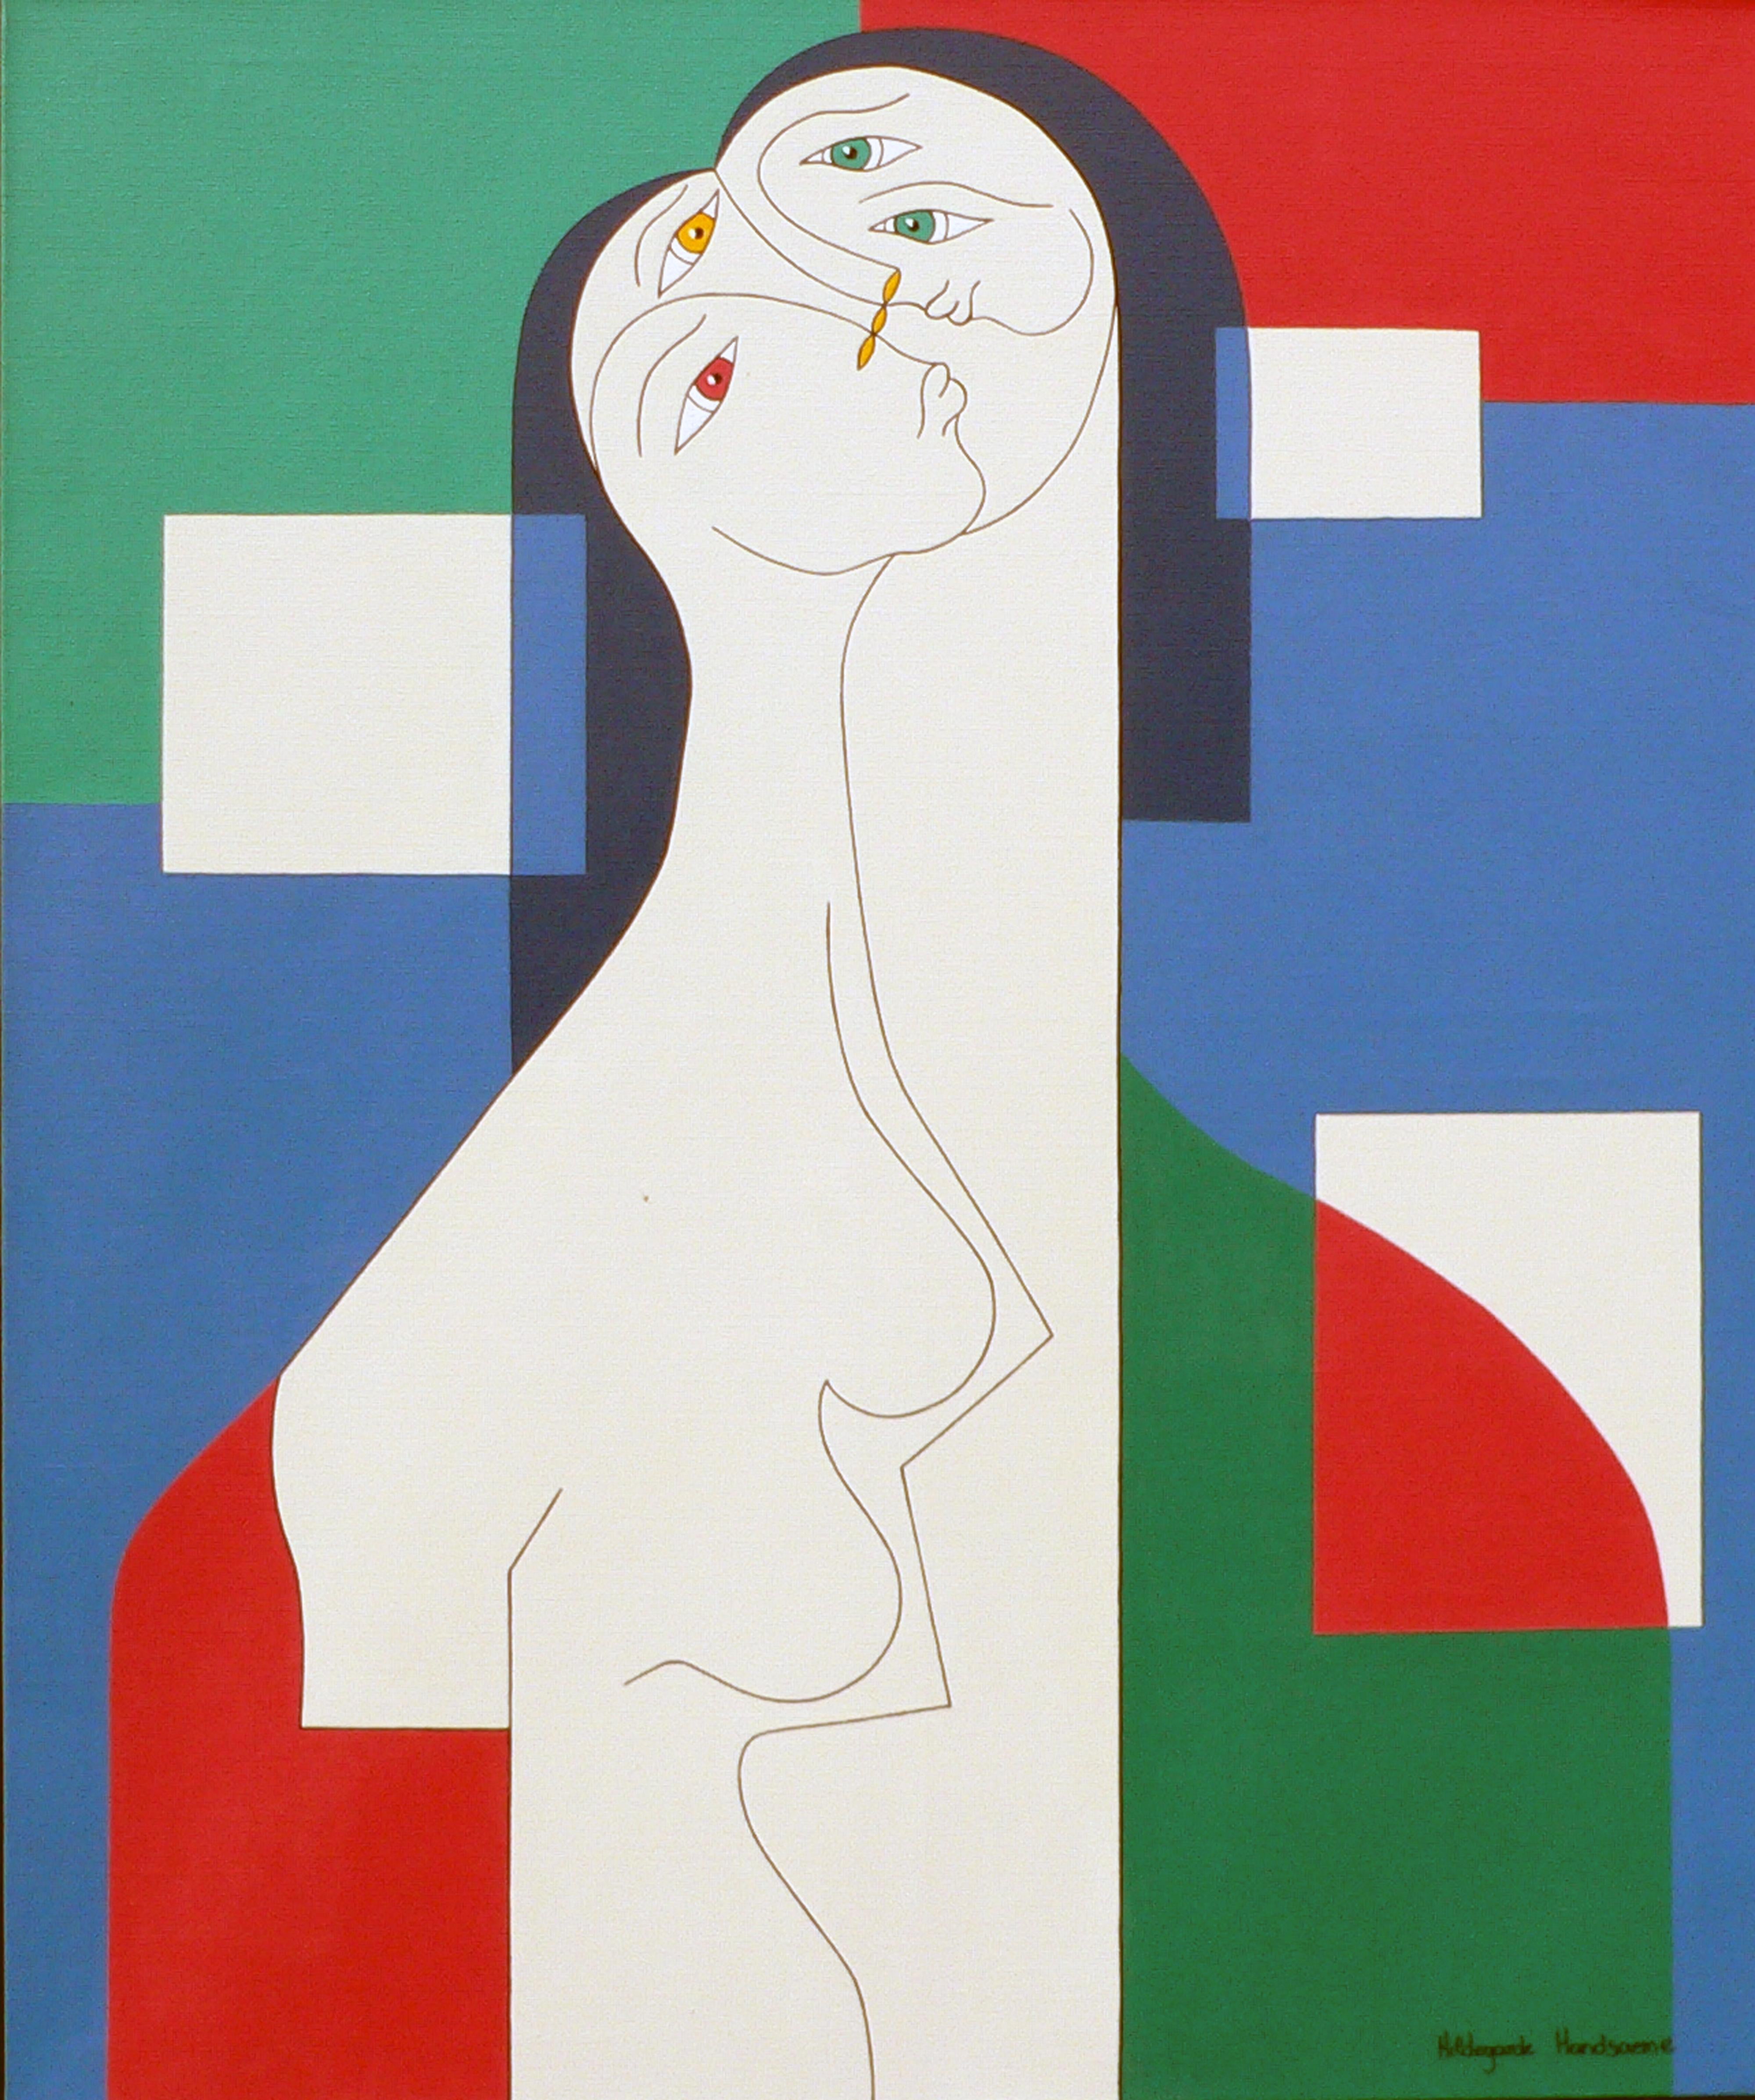 'Trio' by Hildegarde Handsaeme, acrylic on canvas, abstraction

The artist paints mainly women and follows a harmonic and constructively perfect pattern. The figure in itself is dominating but the artist knows how to put it the right surroundings